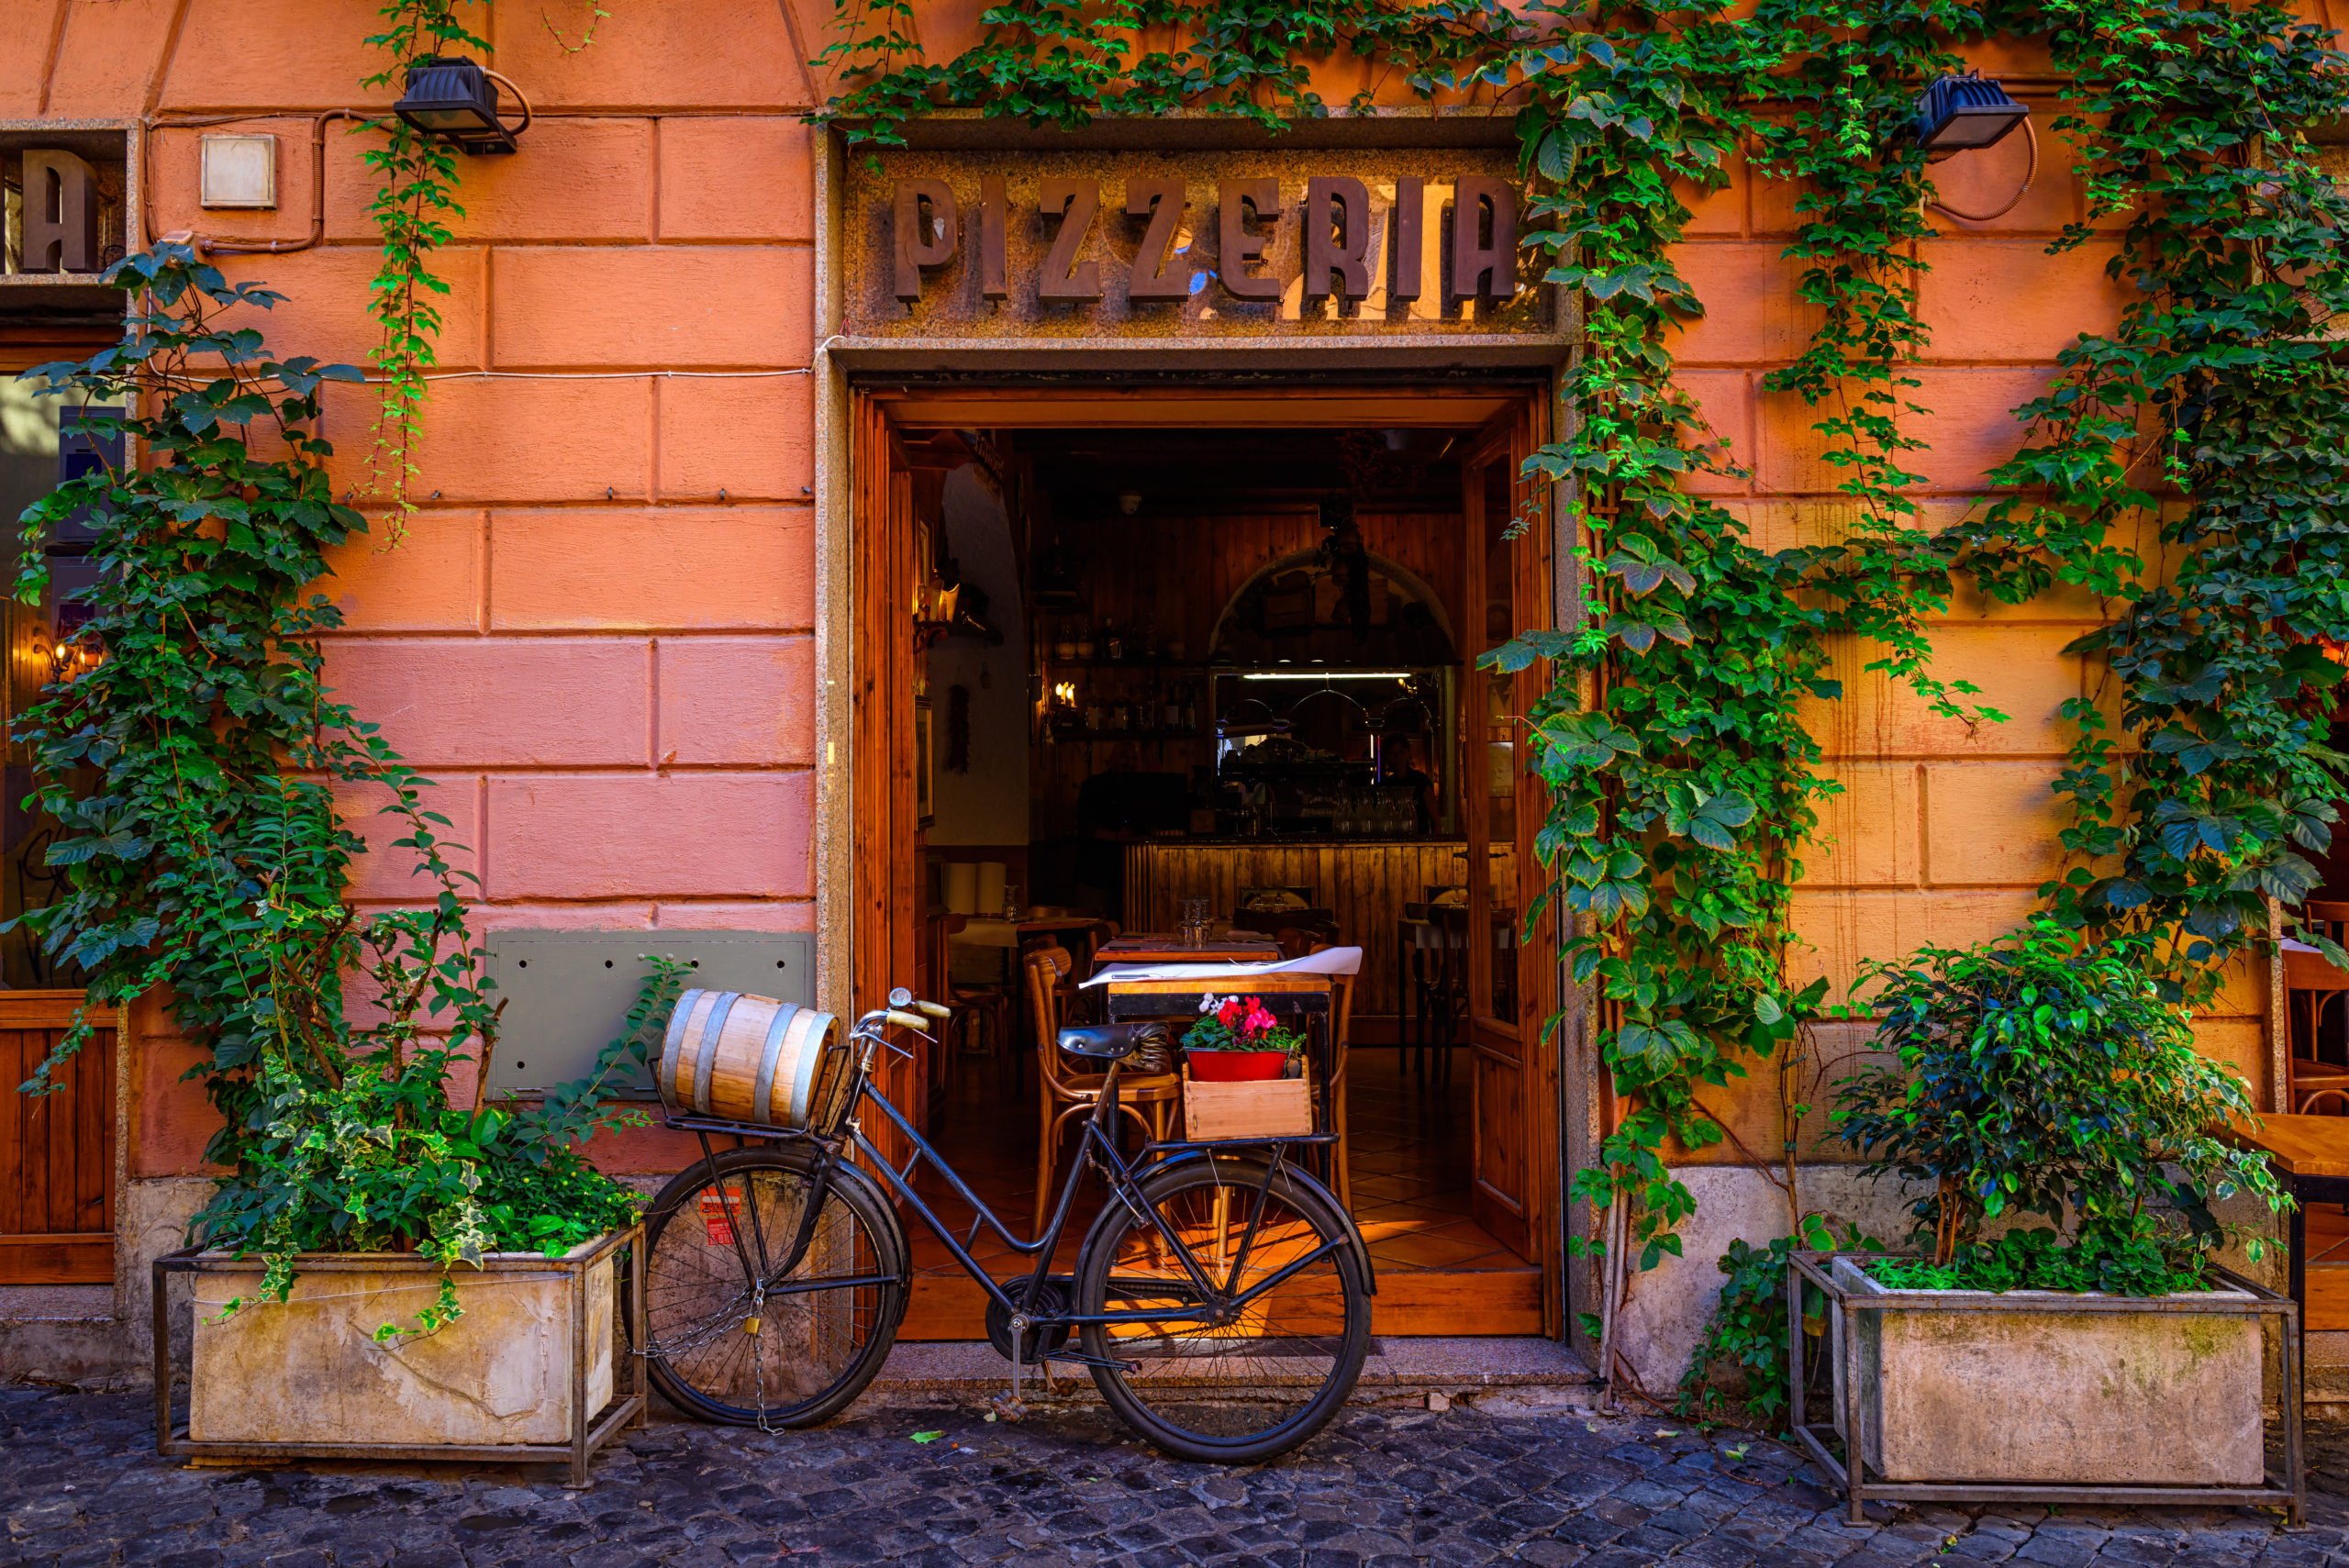 Discover The Roman Cuisine On The Rome Food Tour